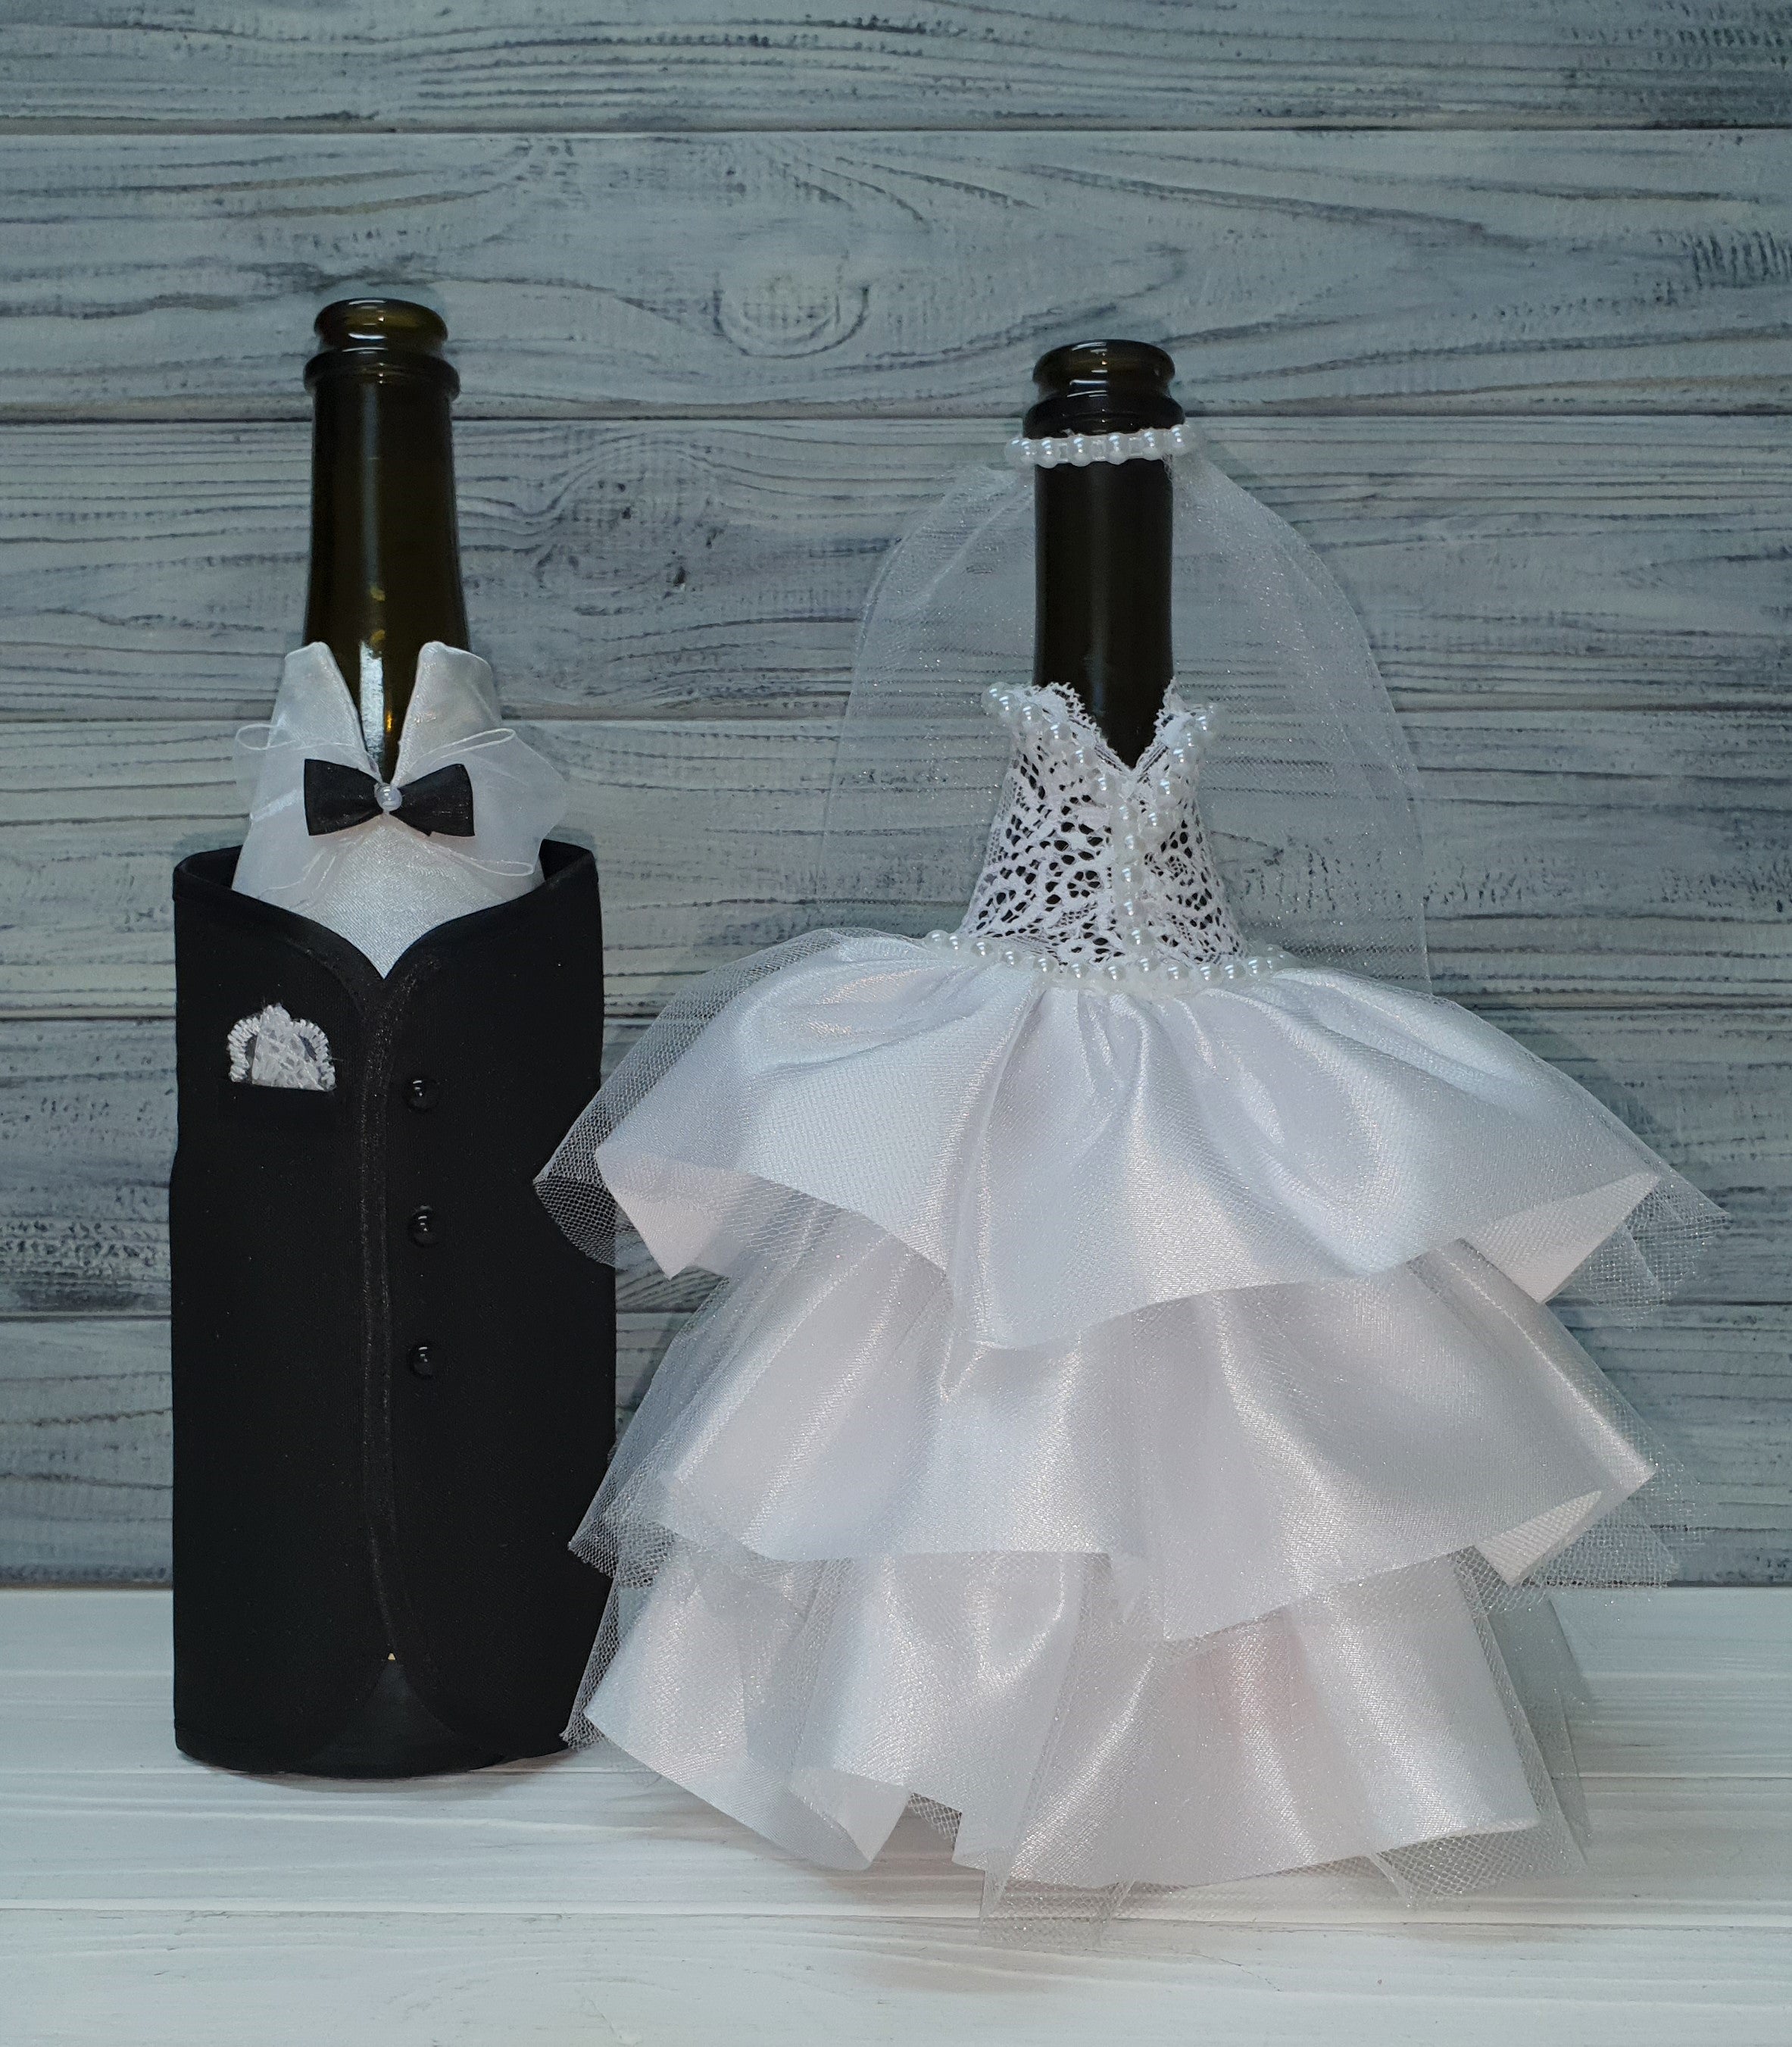 Magik Life Bride and Groom Wine Bottle Covers- Wine bottle dress-up for Weddings- Bachelorette and Engagement Party -Wedding Gifts For the Couple- Fun Wine Bottle Covers- Wedding Centerpieces Decorations- Wine décor and Accessories